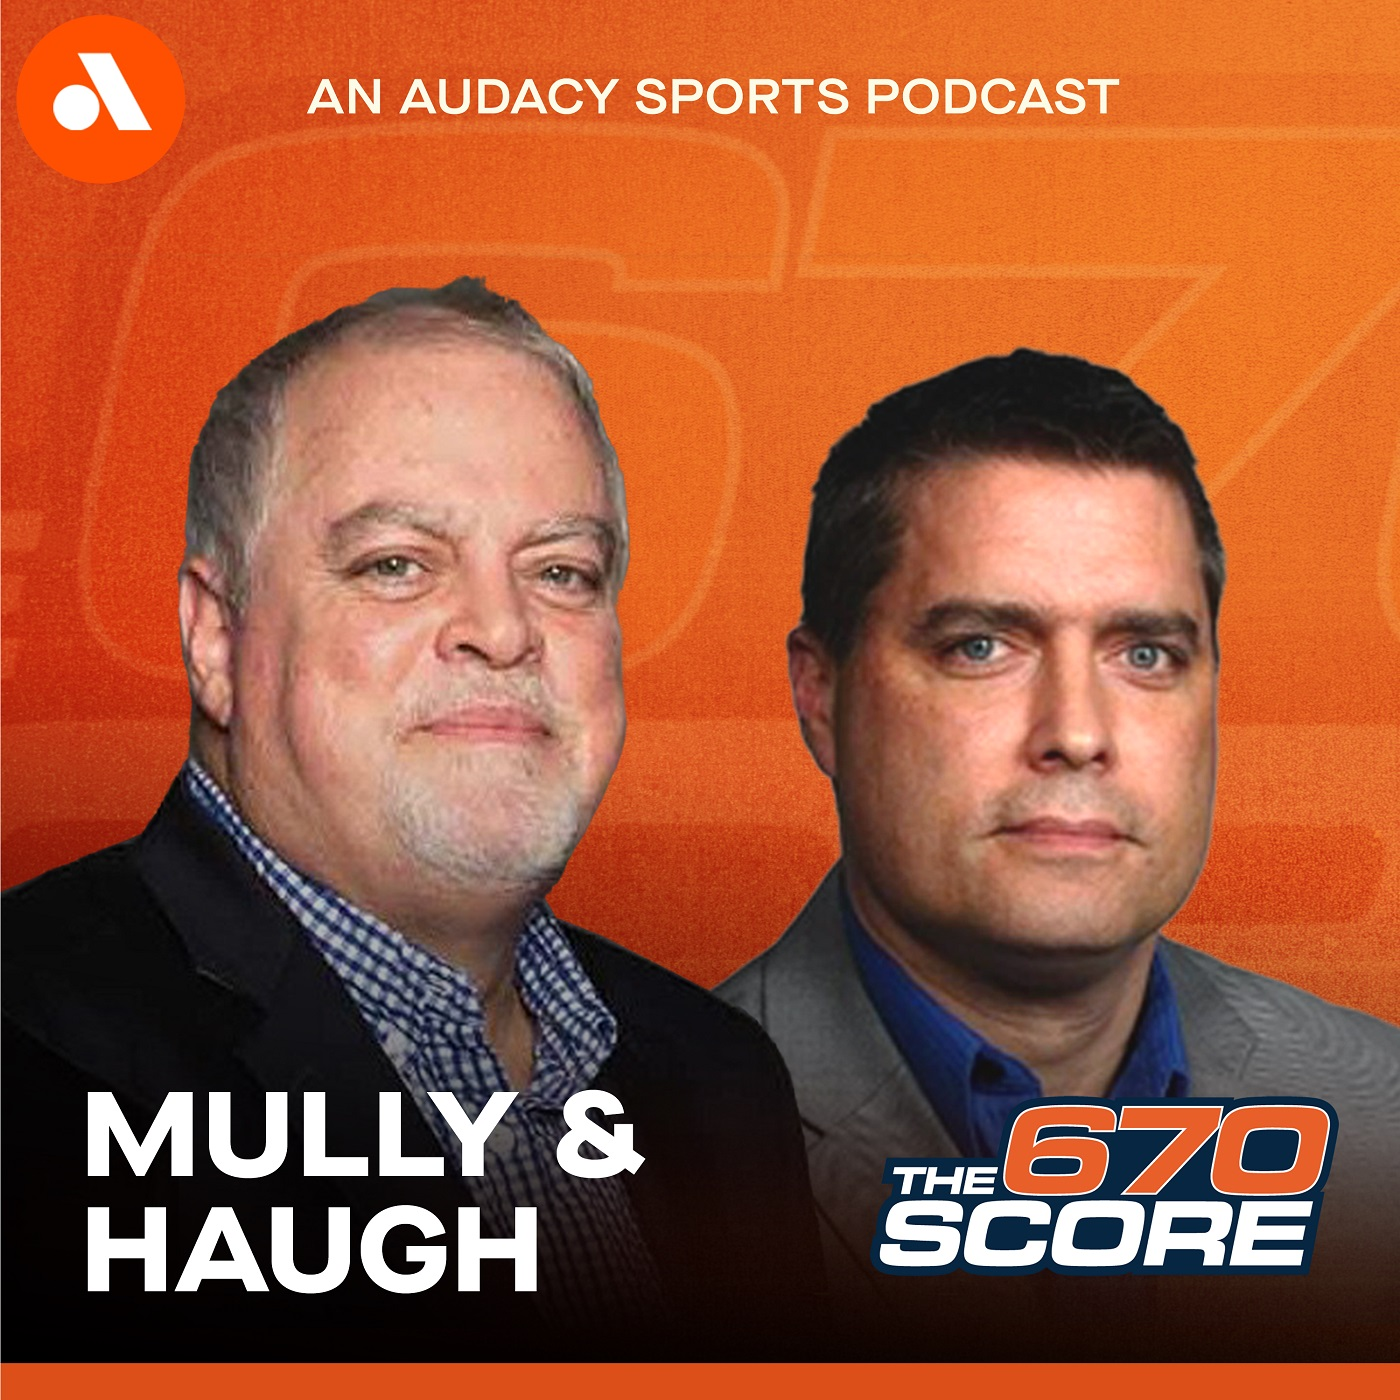 Mully & Haugh:  Ron Coomer & Dan Pompei interviews (Hour 4)